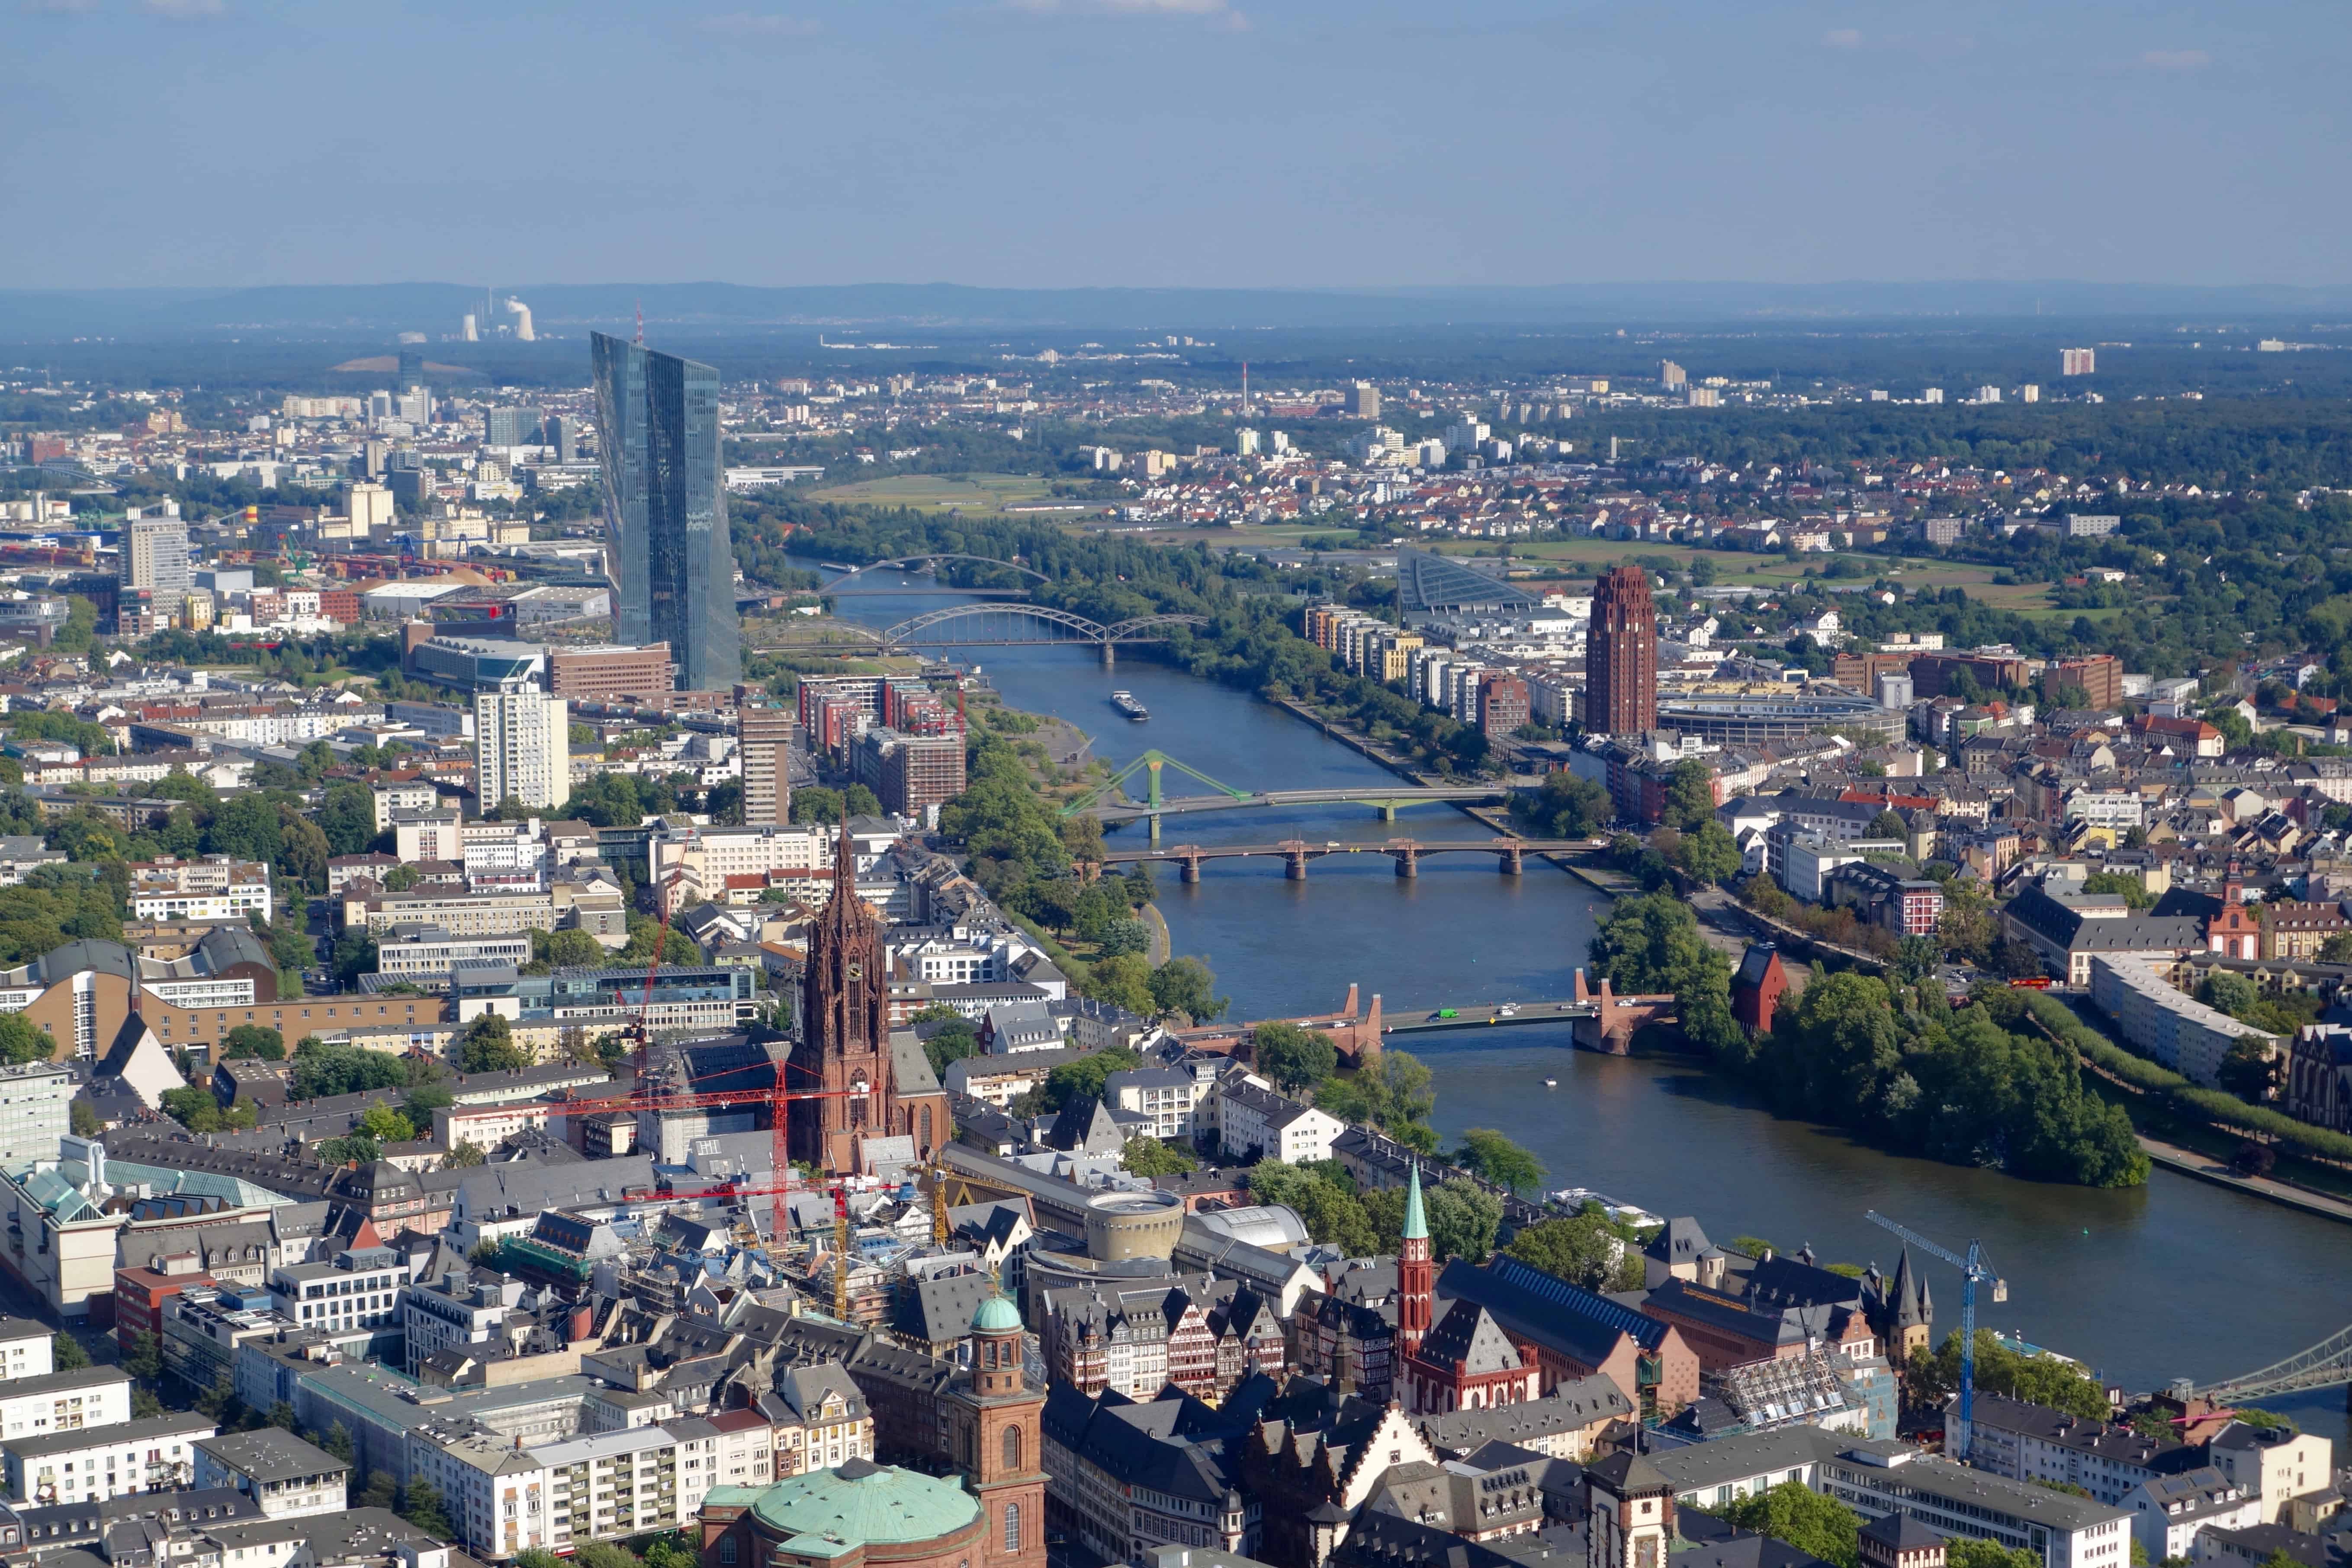 Main tower frankfurt, view from main tower, frankfurt places to visit